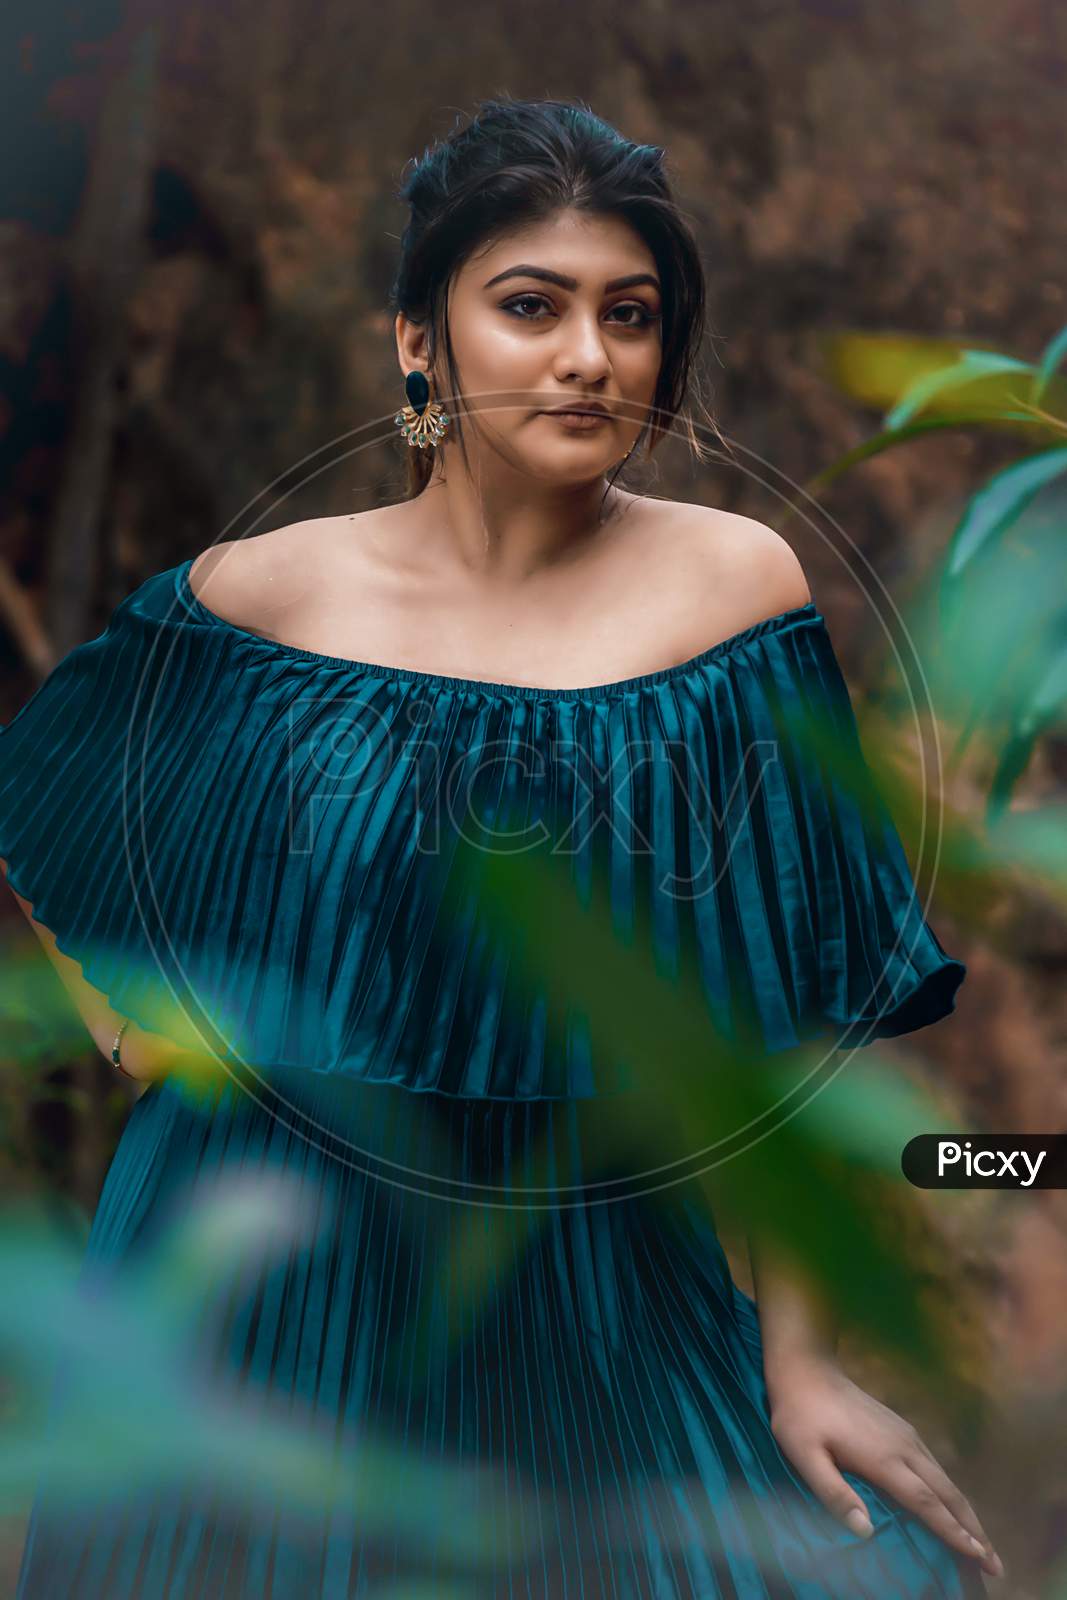 Shantiniketan, India. Fashion Portrait Of Beautiful Indian Young Girl, Moody Colors, Wearing A Blue Western Dress. Indian Lifestyle And Fashion. September 2019